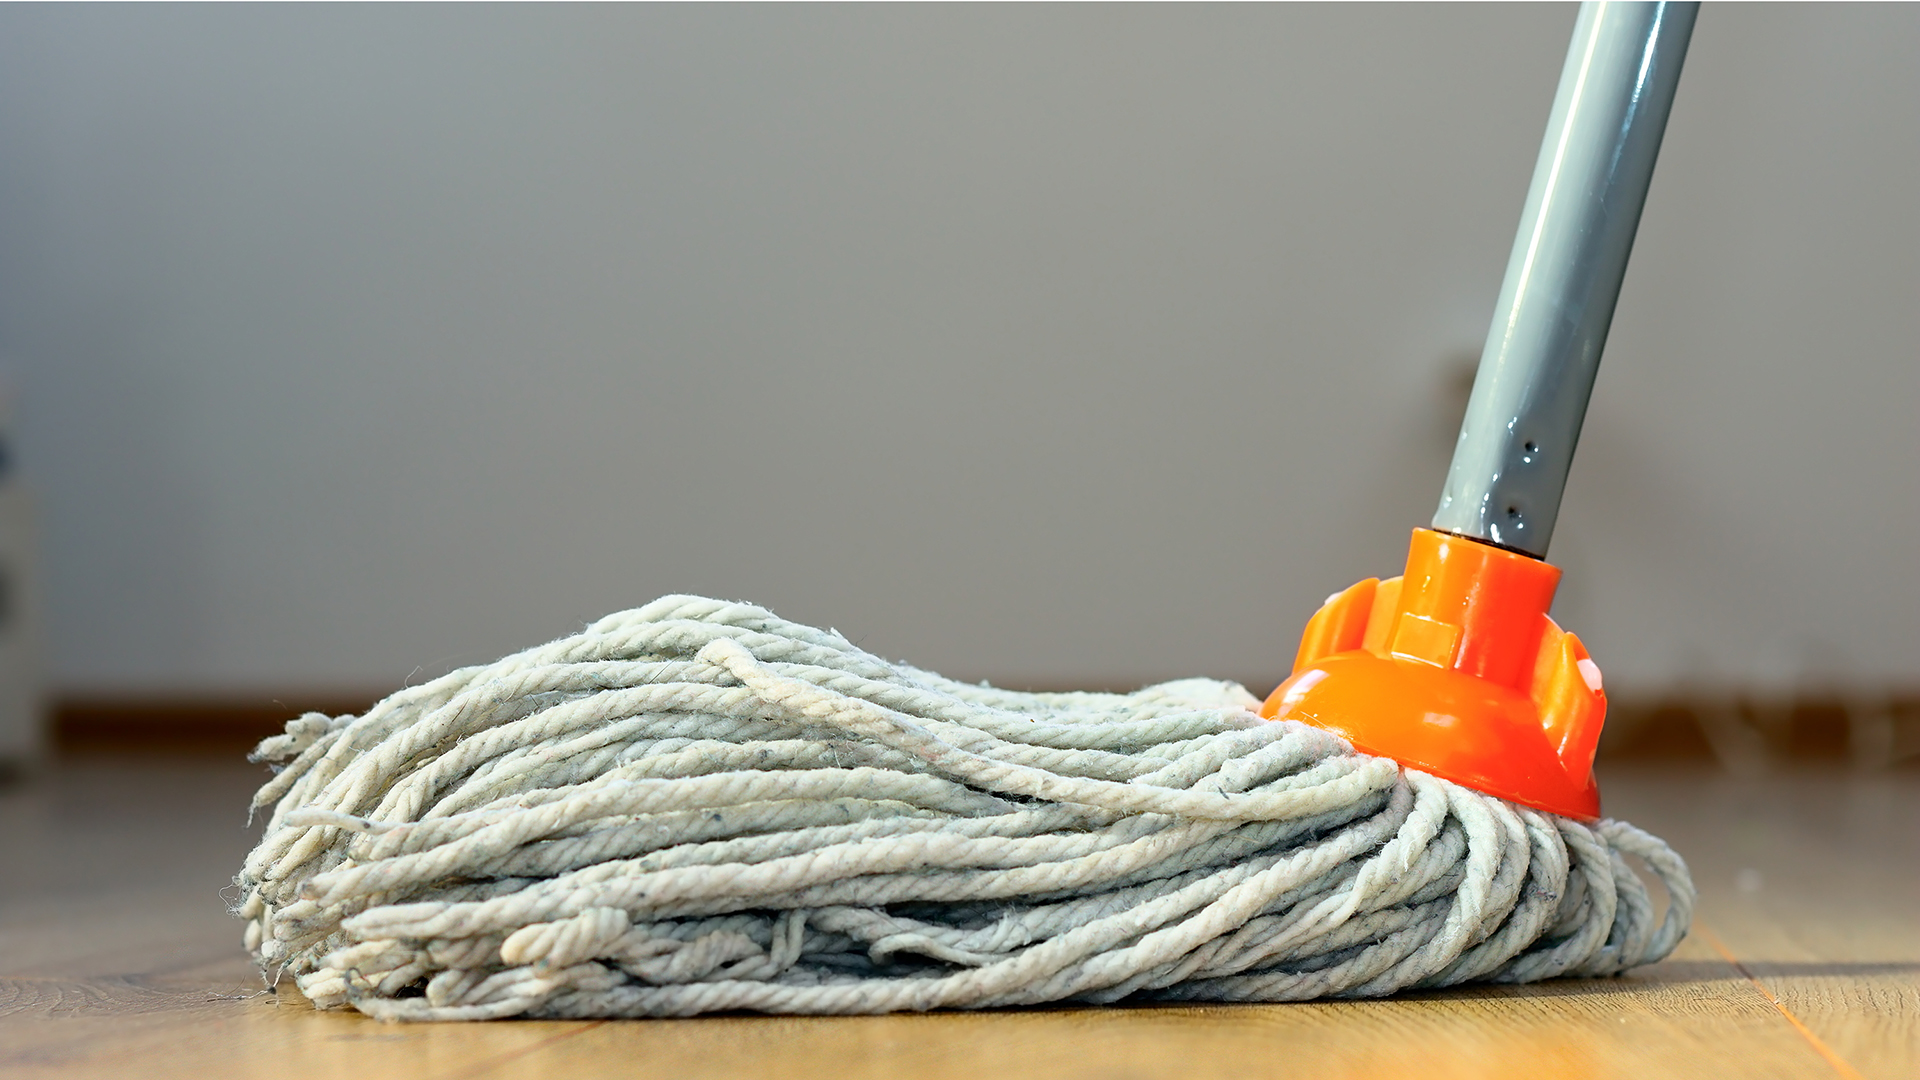 Steam Mop Vs Regular Mop: What Are Their Differences?